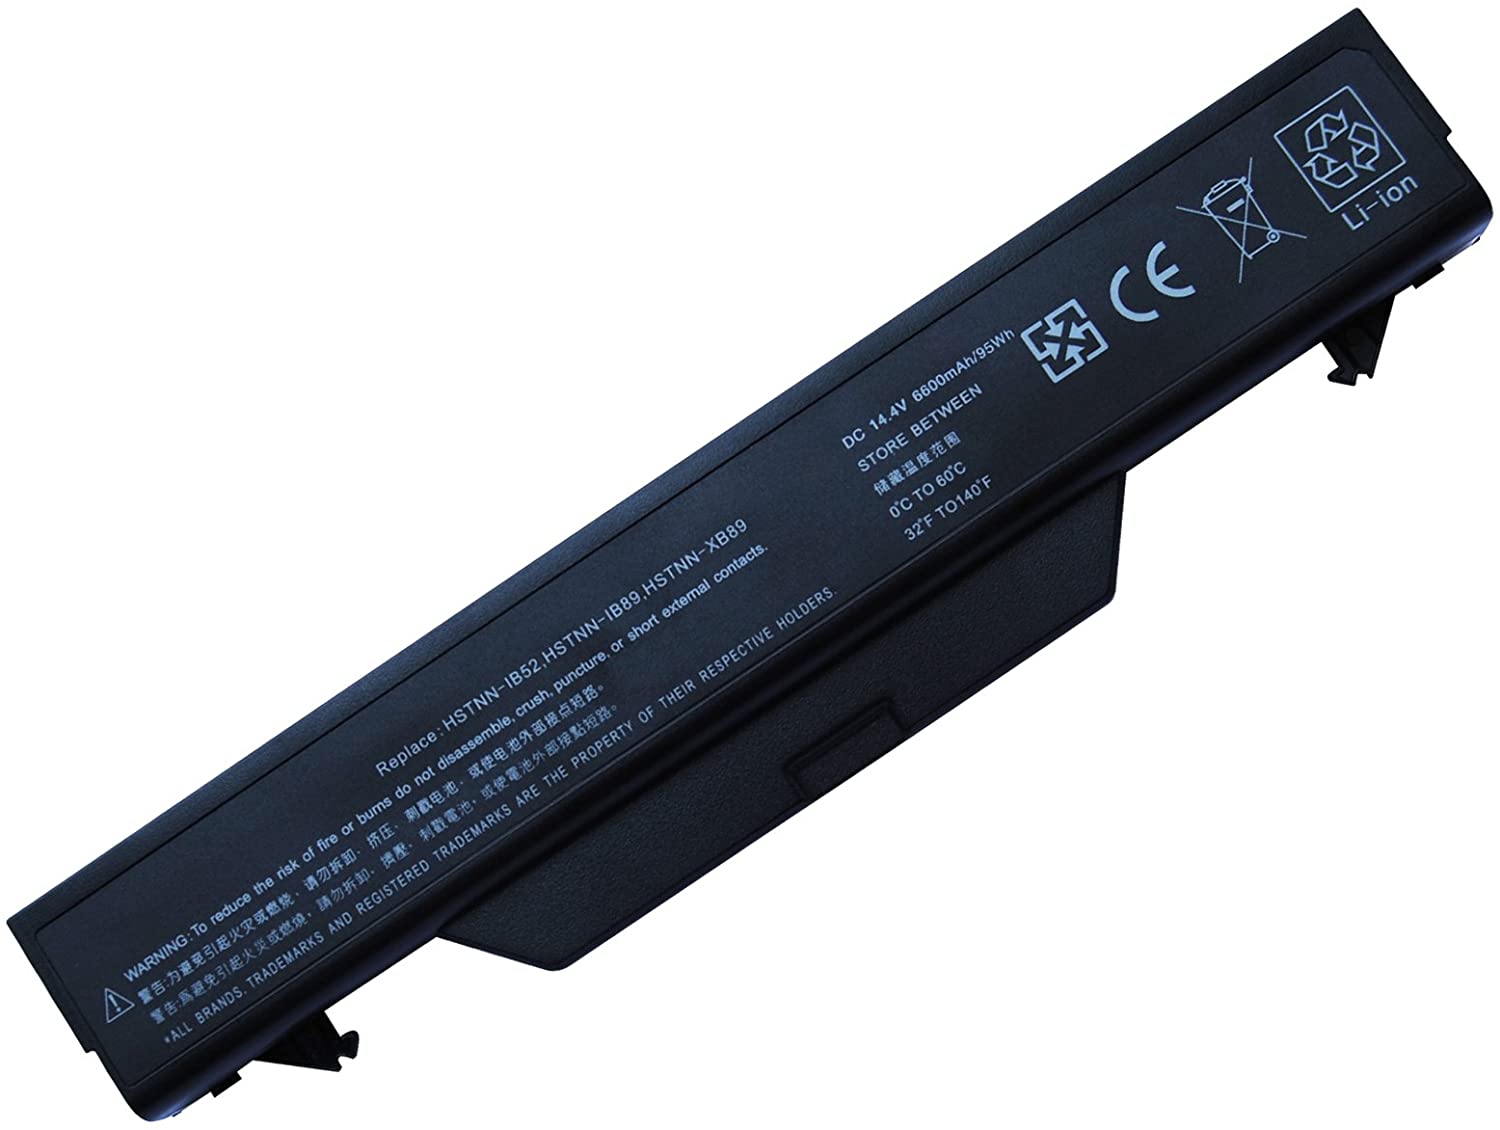 Replacement Laptop Battery for HP ProBook 4710s